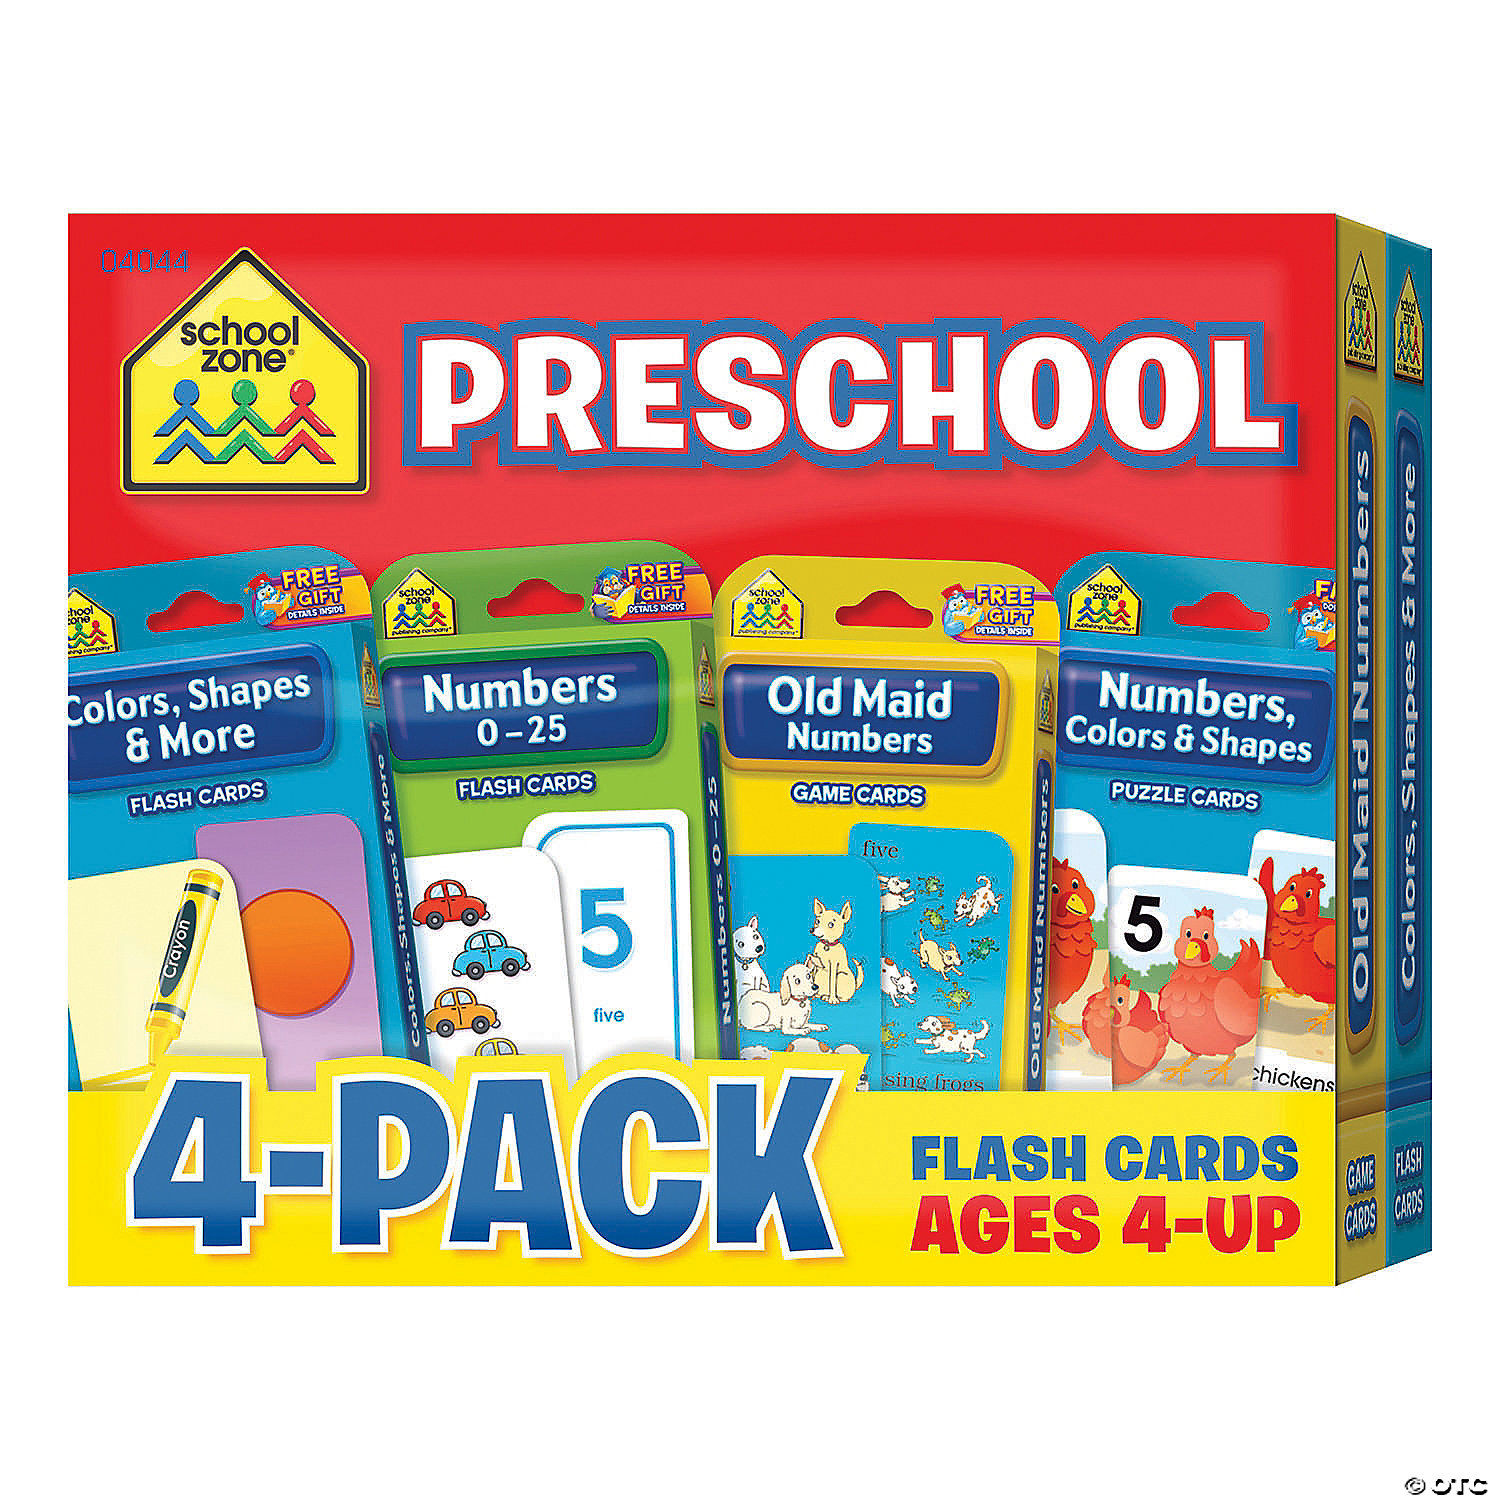 Bendon Educational Matching Games Flash Cards Lot of 4 Same Colors Animals 3 